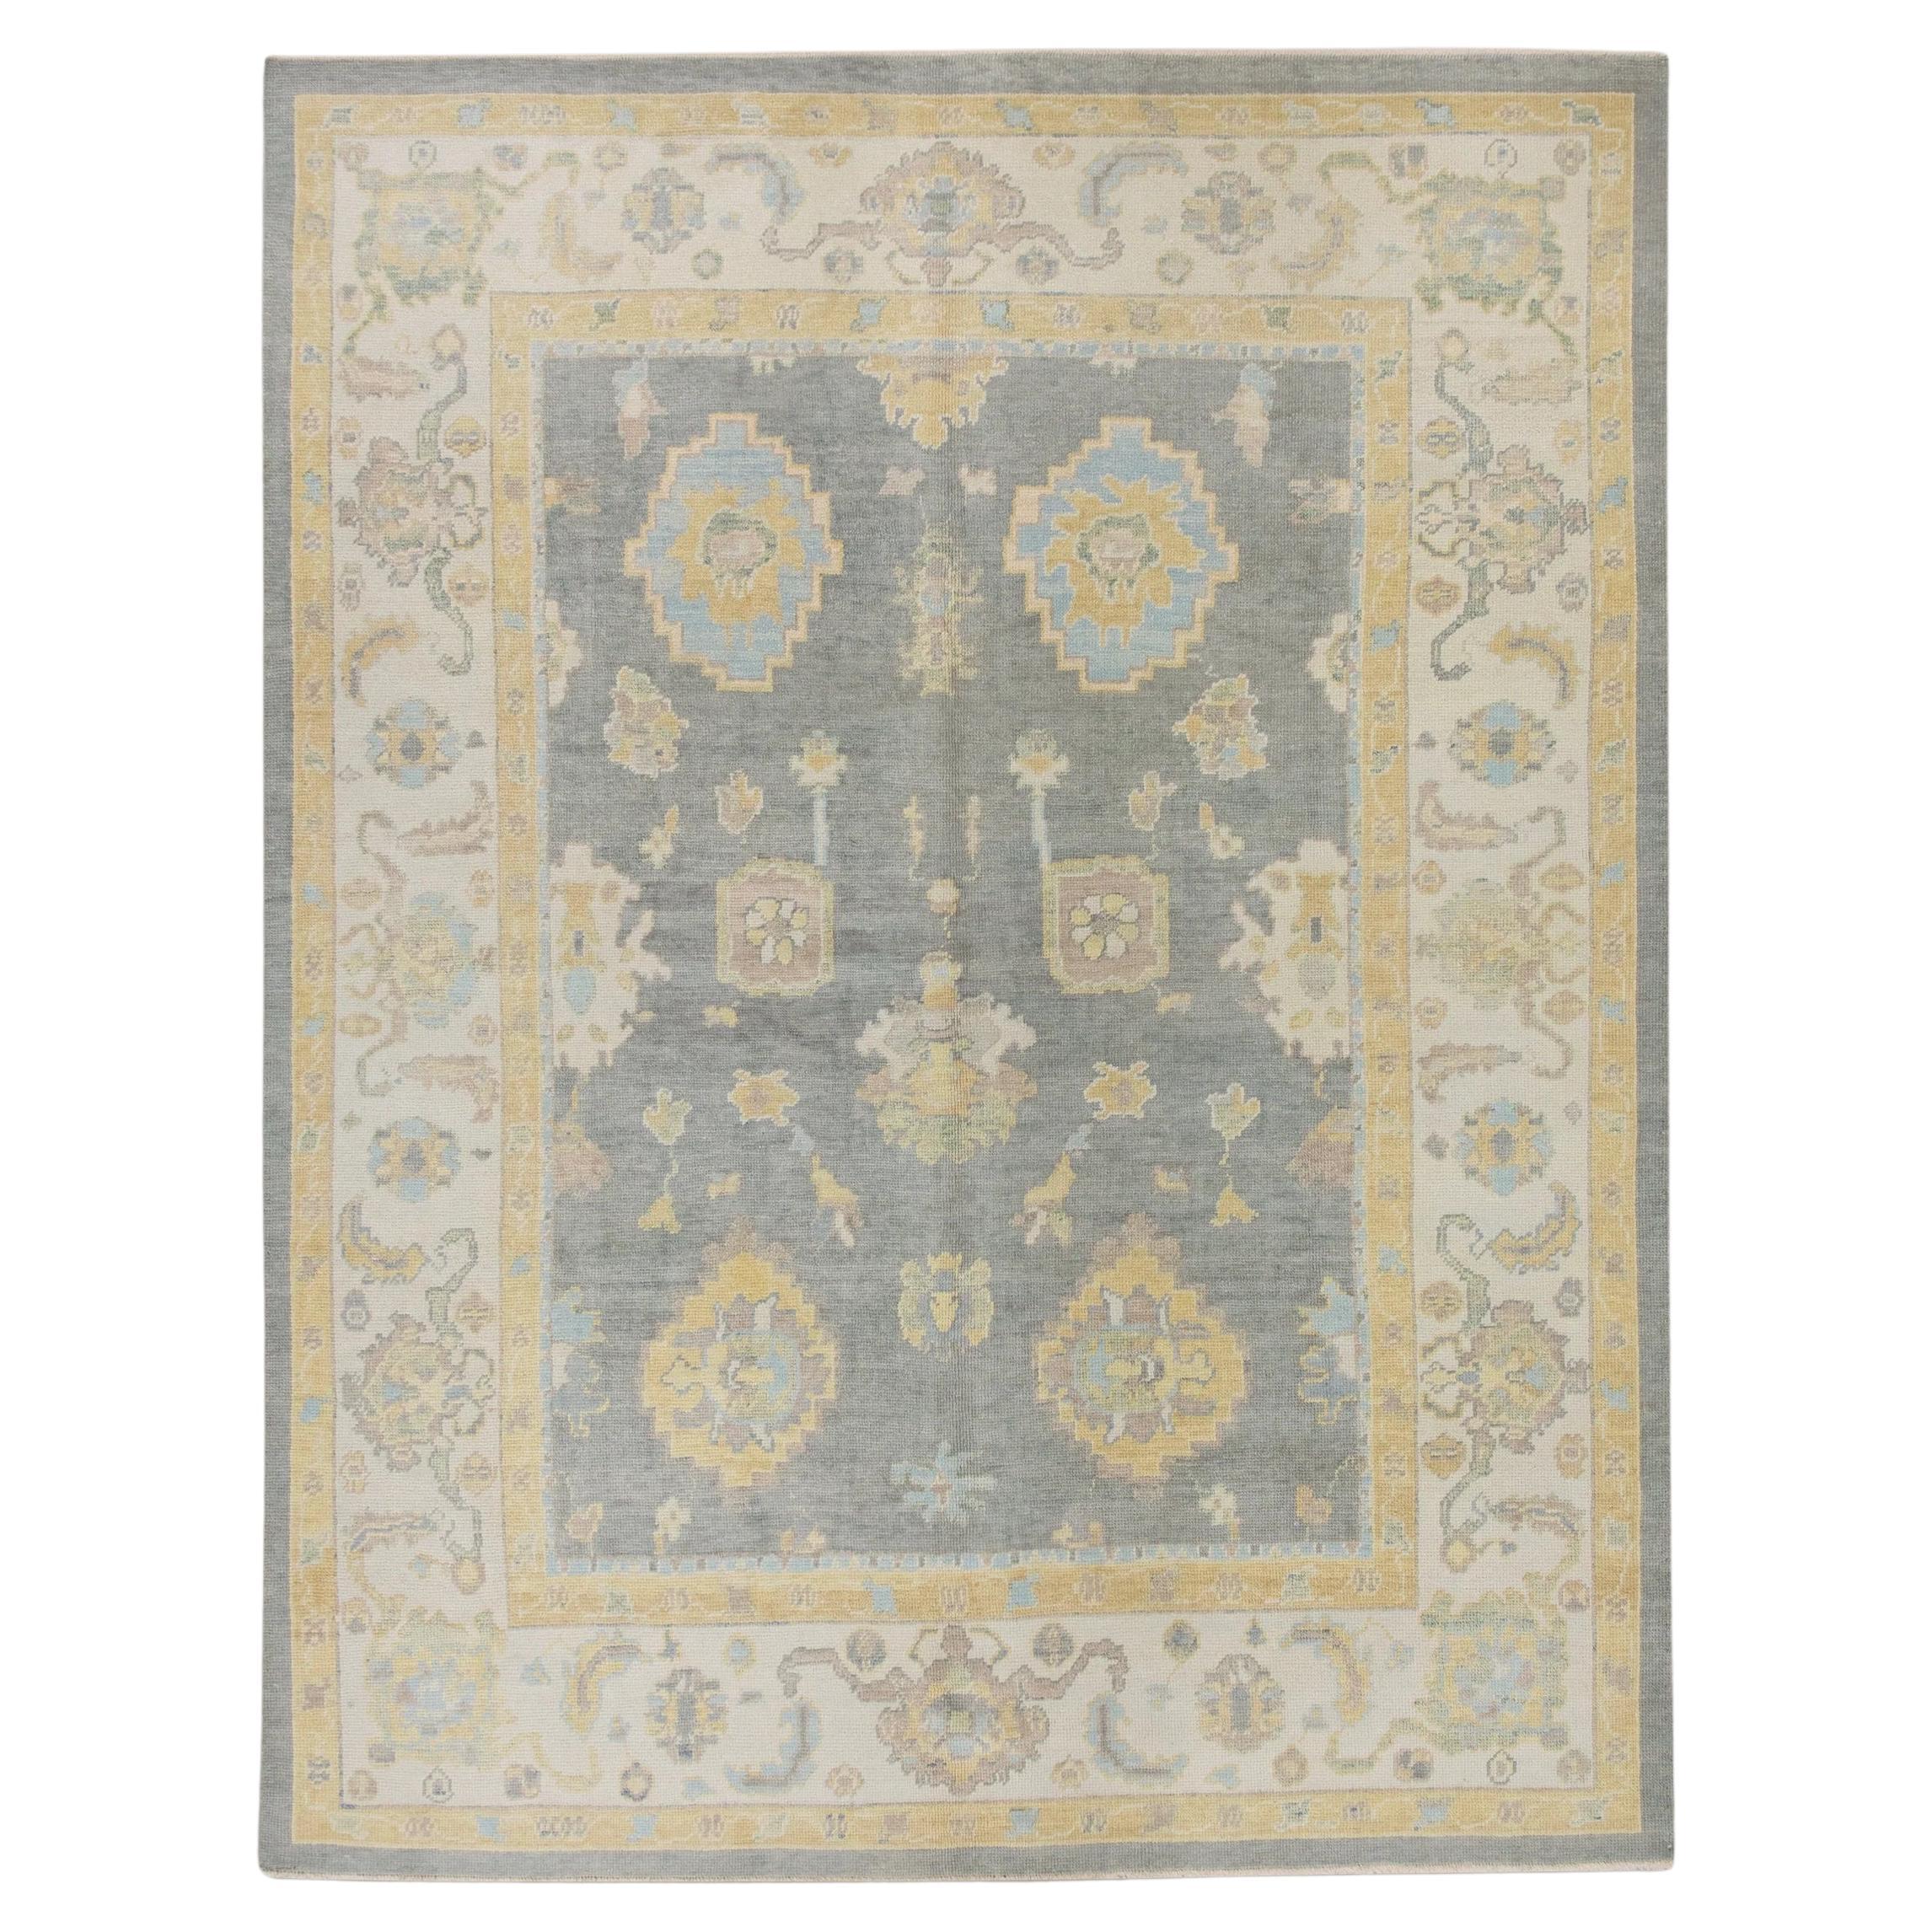 Gray & Yellow Handwoven Wool Turkish Oushak Rug in Floral Design 7'11" x 10'2" For Sale